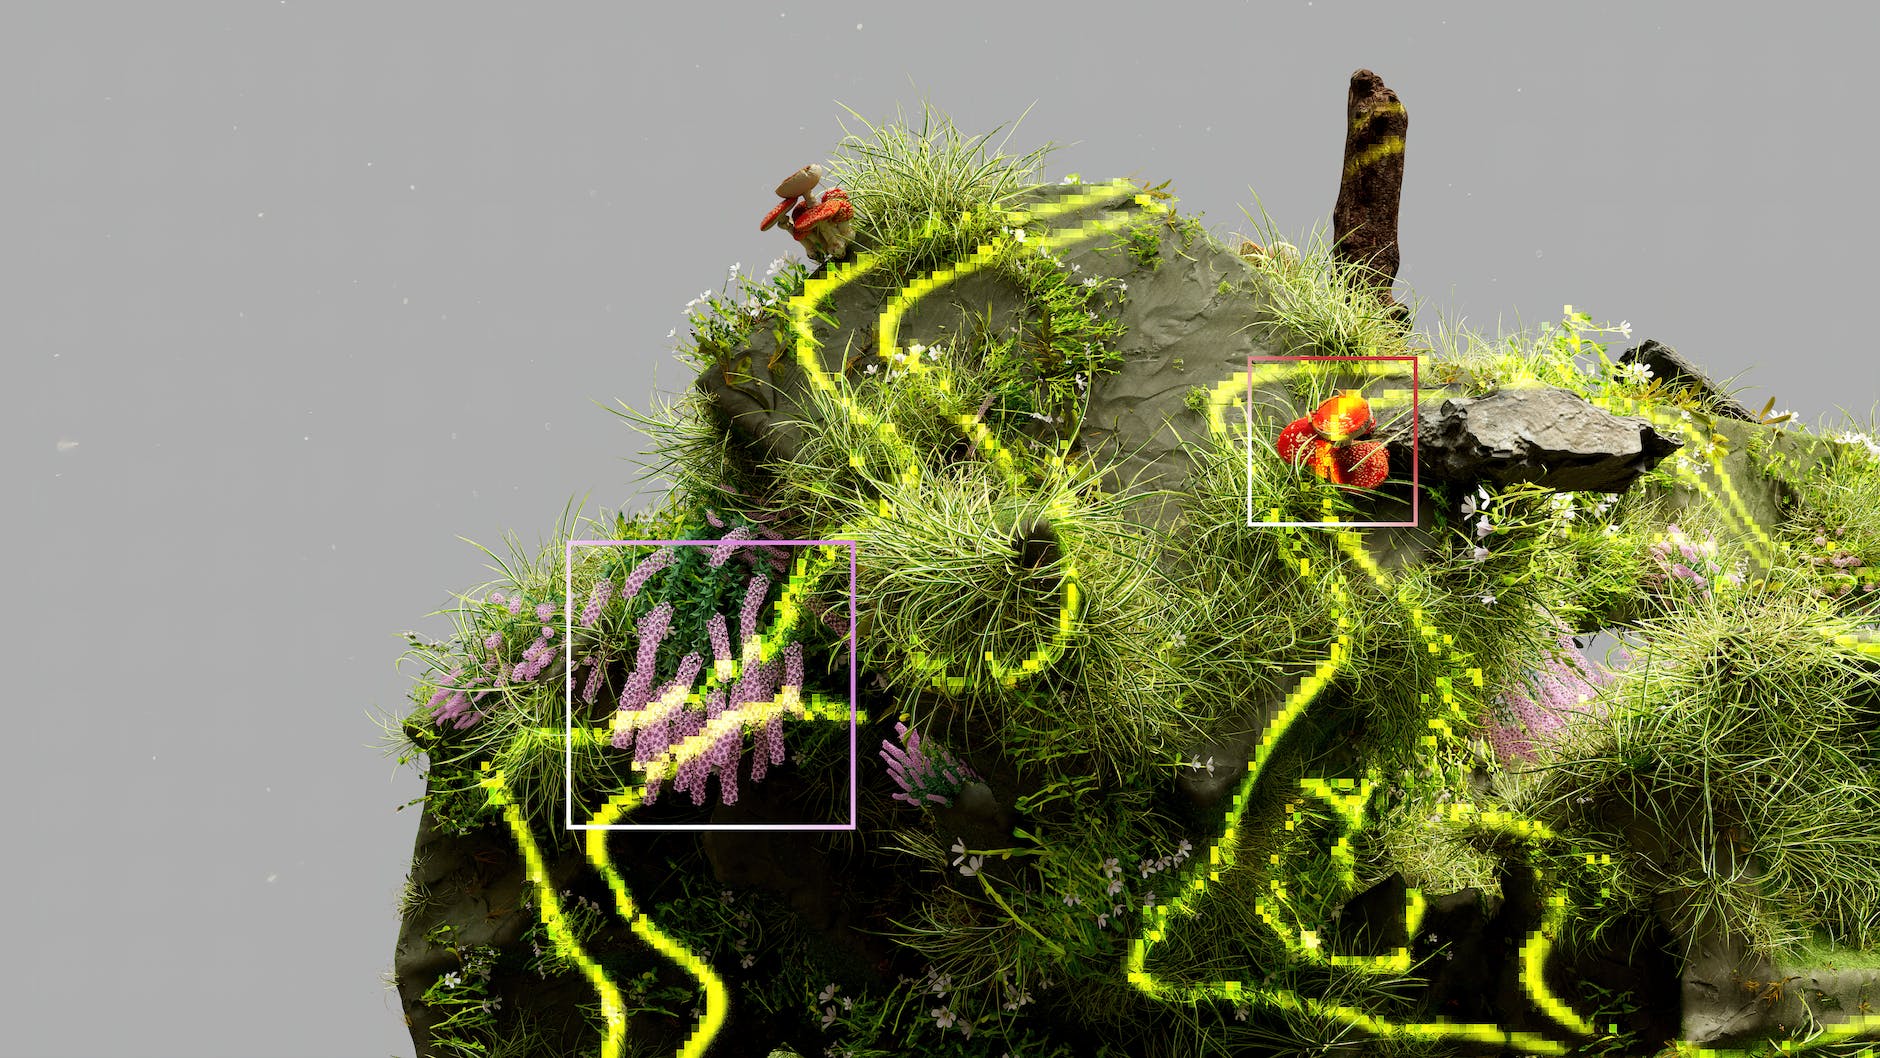 an artist s illustration of artificial intelligence ai this image depicts how ai could help understand ecosystems and identify species it was created by nidia dias as part of the visua Green IT: Rewolucja Cyfrowa w Służbie Ekologii - co oznacza dla nas?!